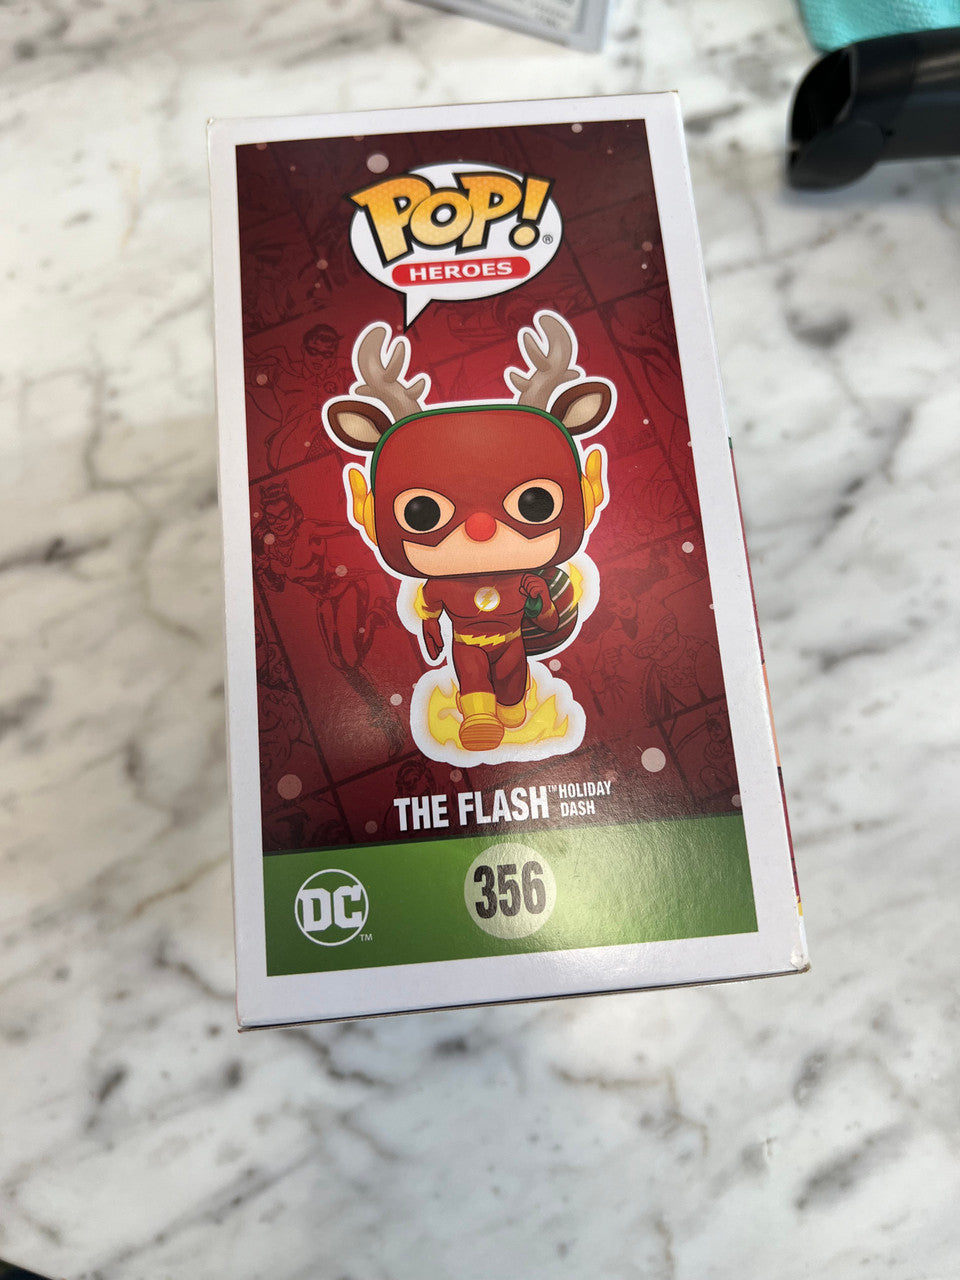 Funko POP! Heroes Classic Flash Holiday Dash As Rudolph Red Nose Reindeer